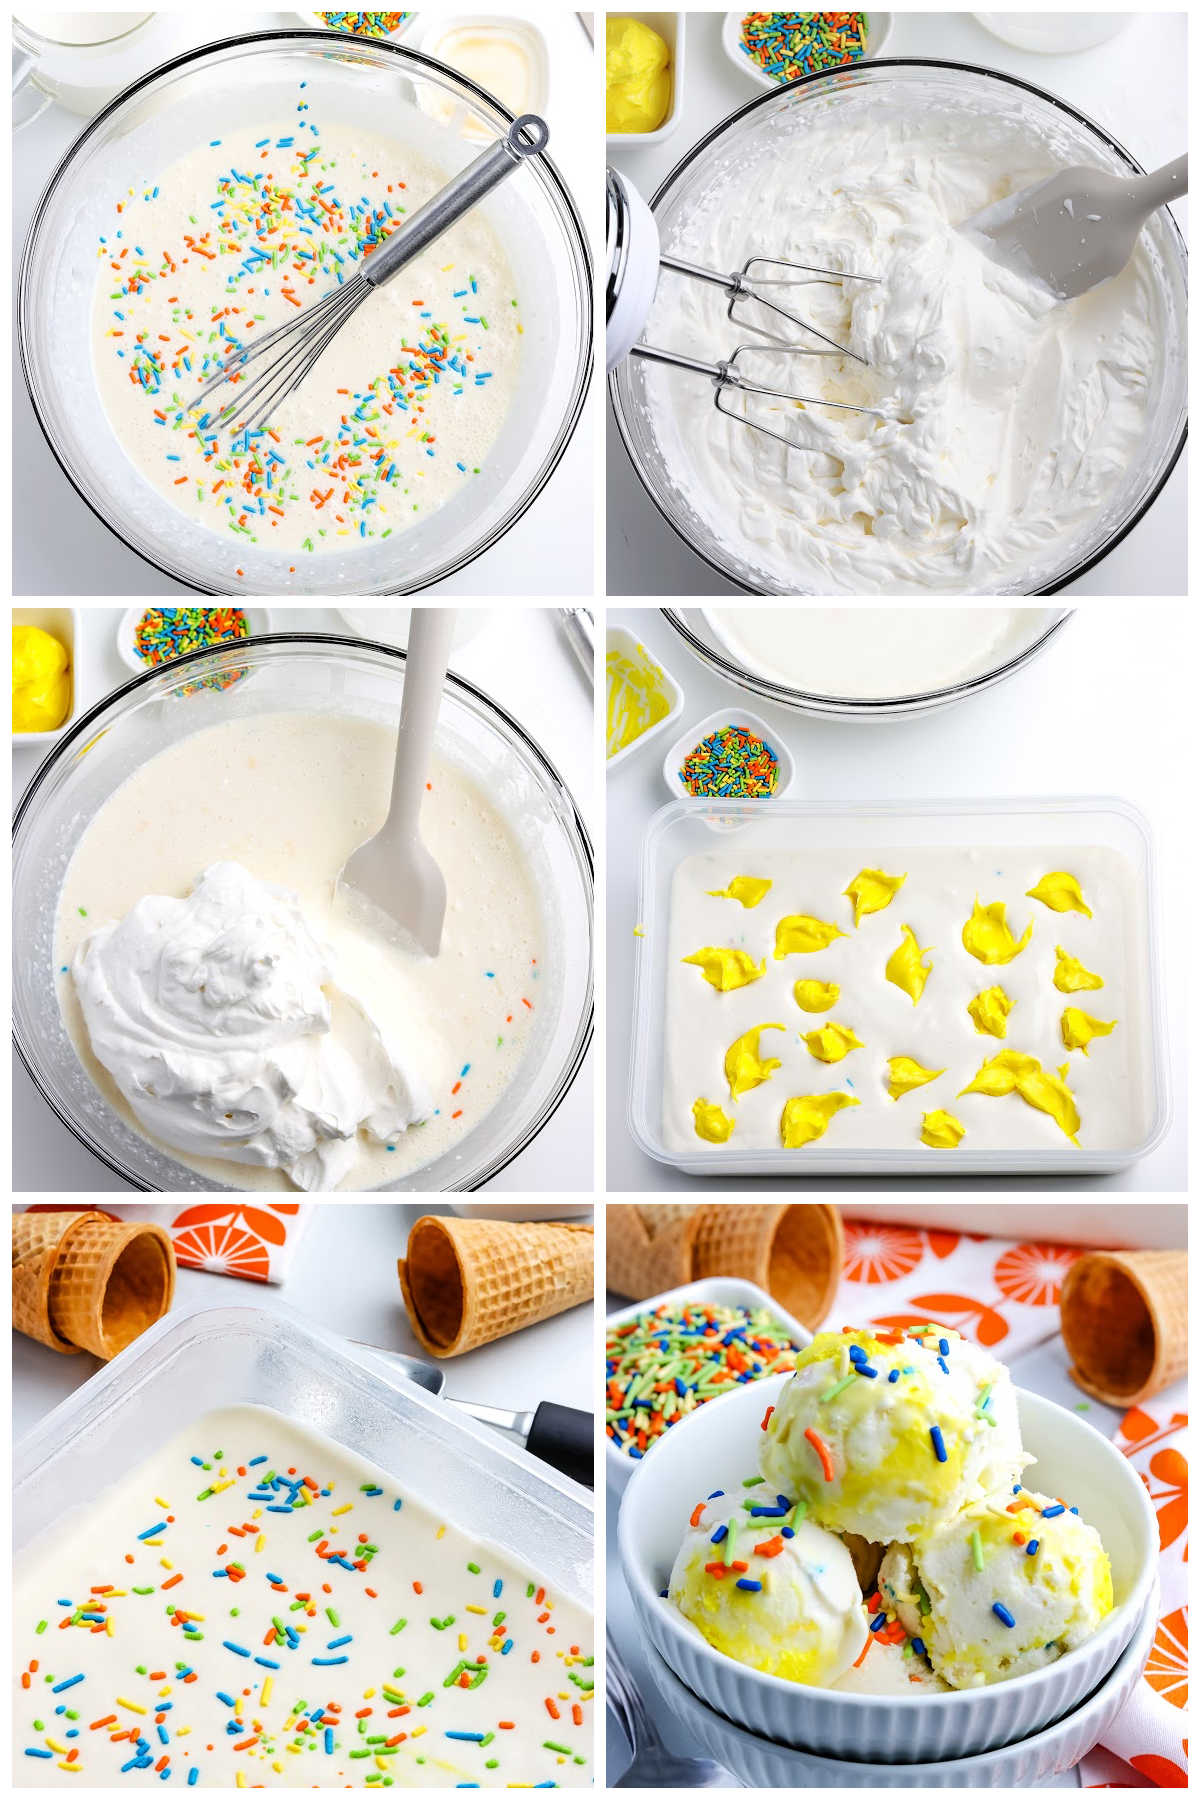 A picture collage of how to make this Funfetti Ice Cream recipe.